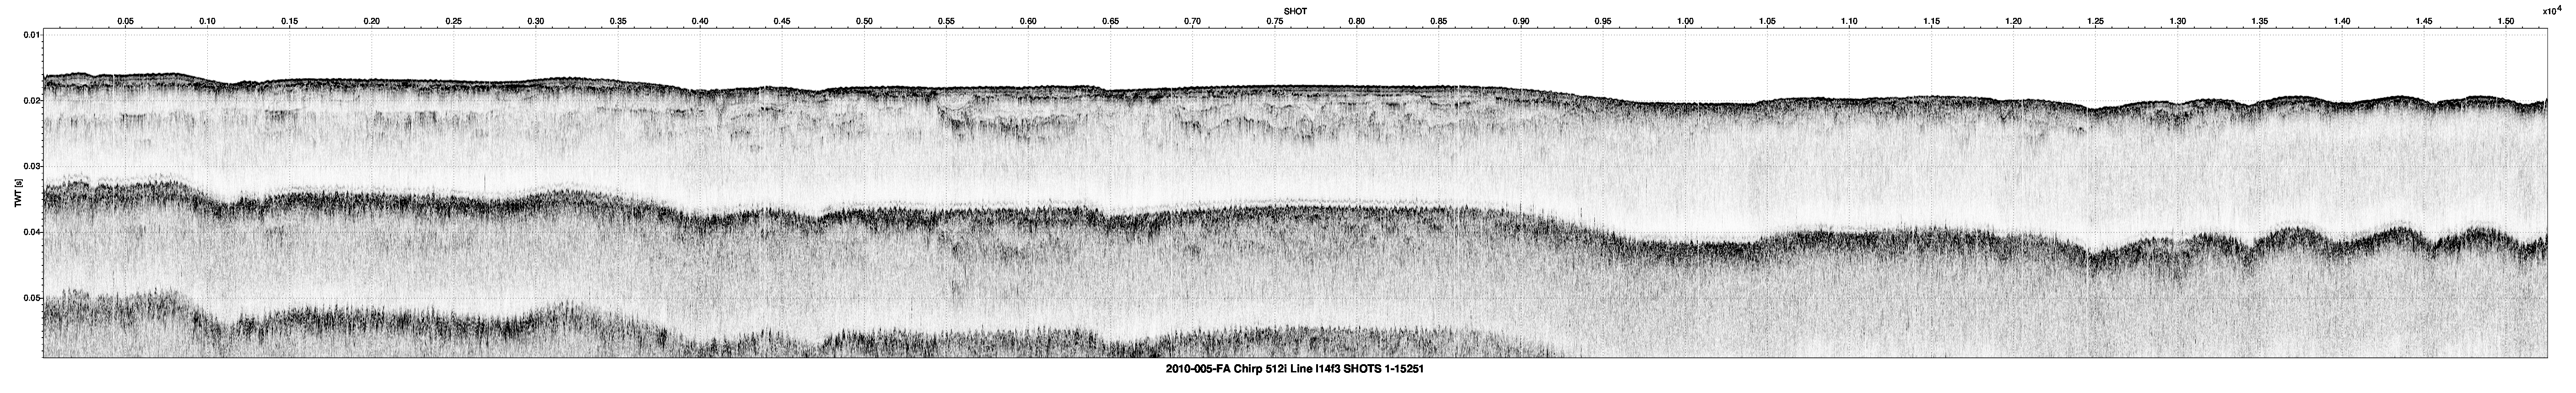 Thumbnail image of chirp subbottom data collected by the U.S. Geological Survey on the inner-continental shelf offshore of Fire Island, NY, 2011.